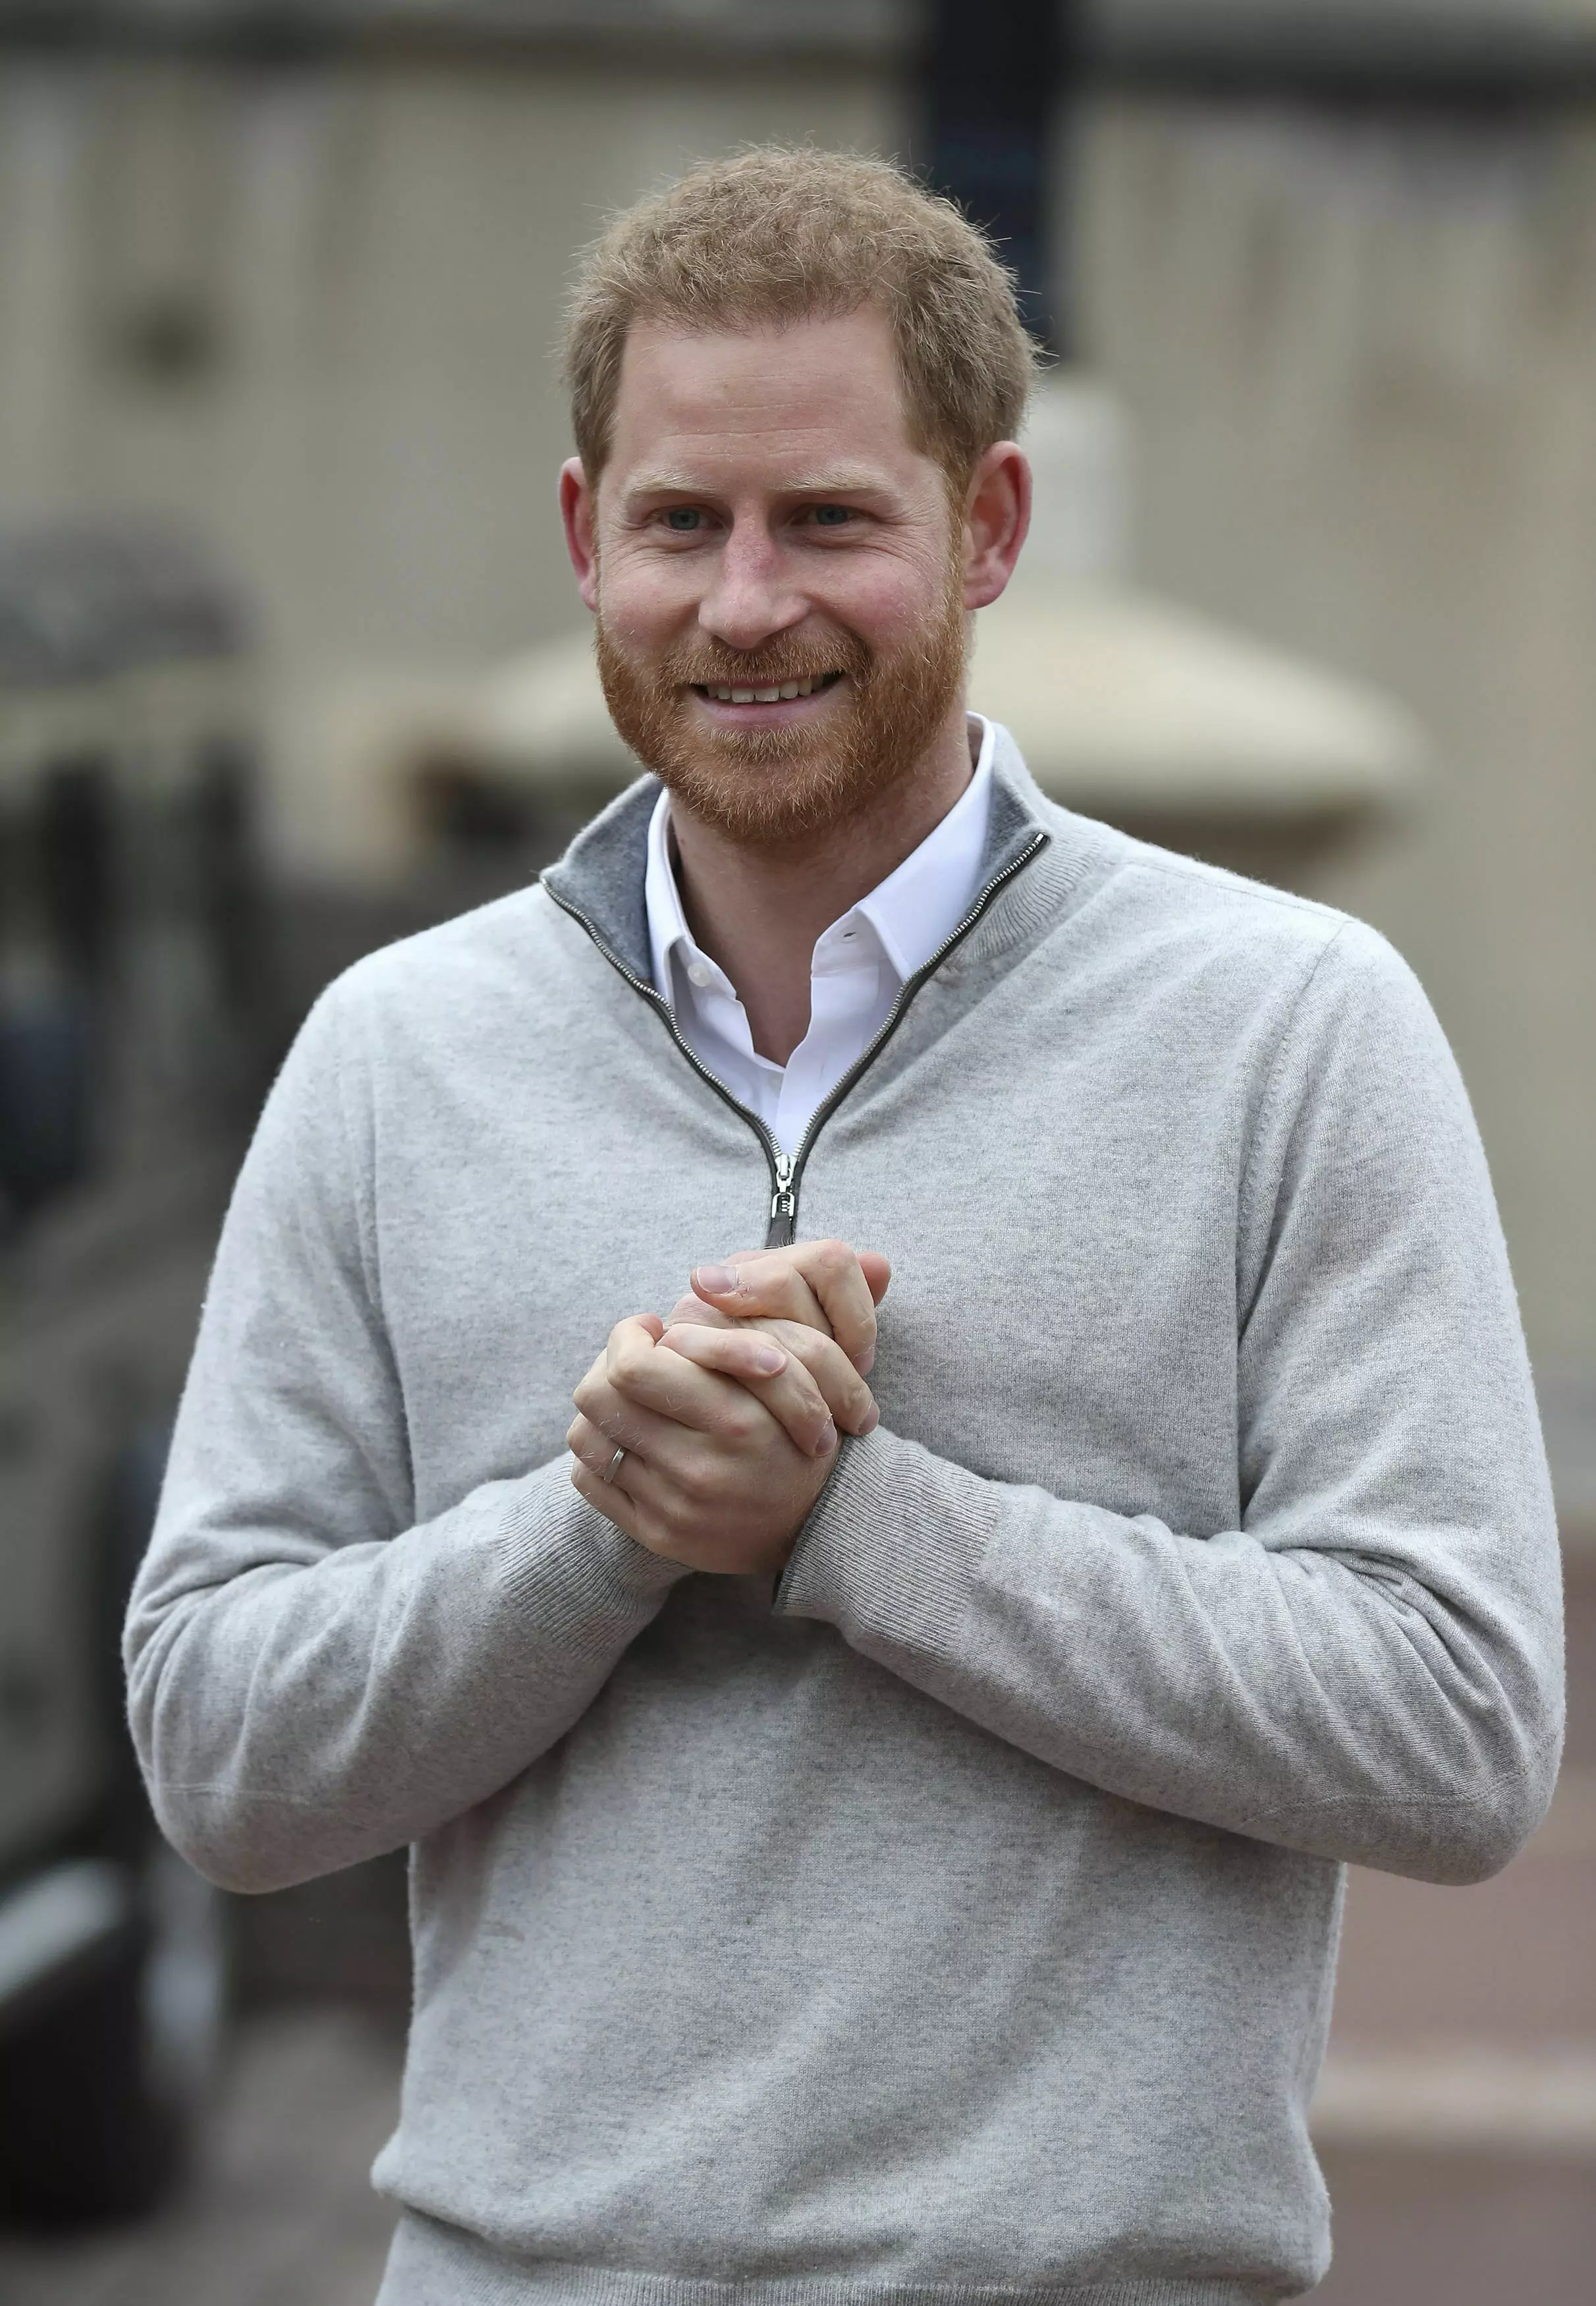 Prince Harry was almost in tears as he spoke to press about the birth of his first child.